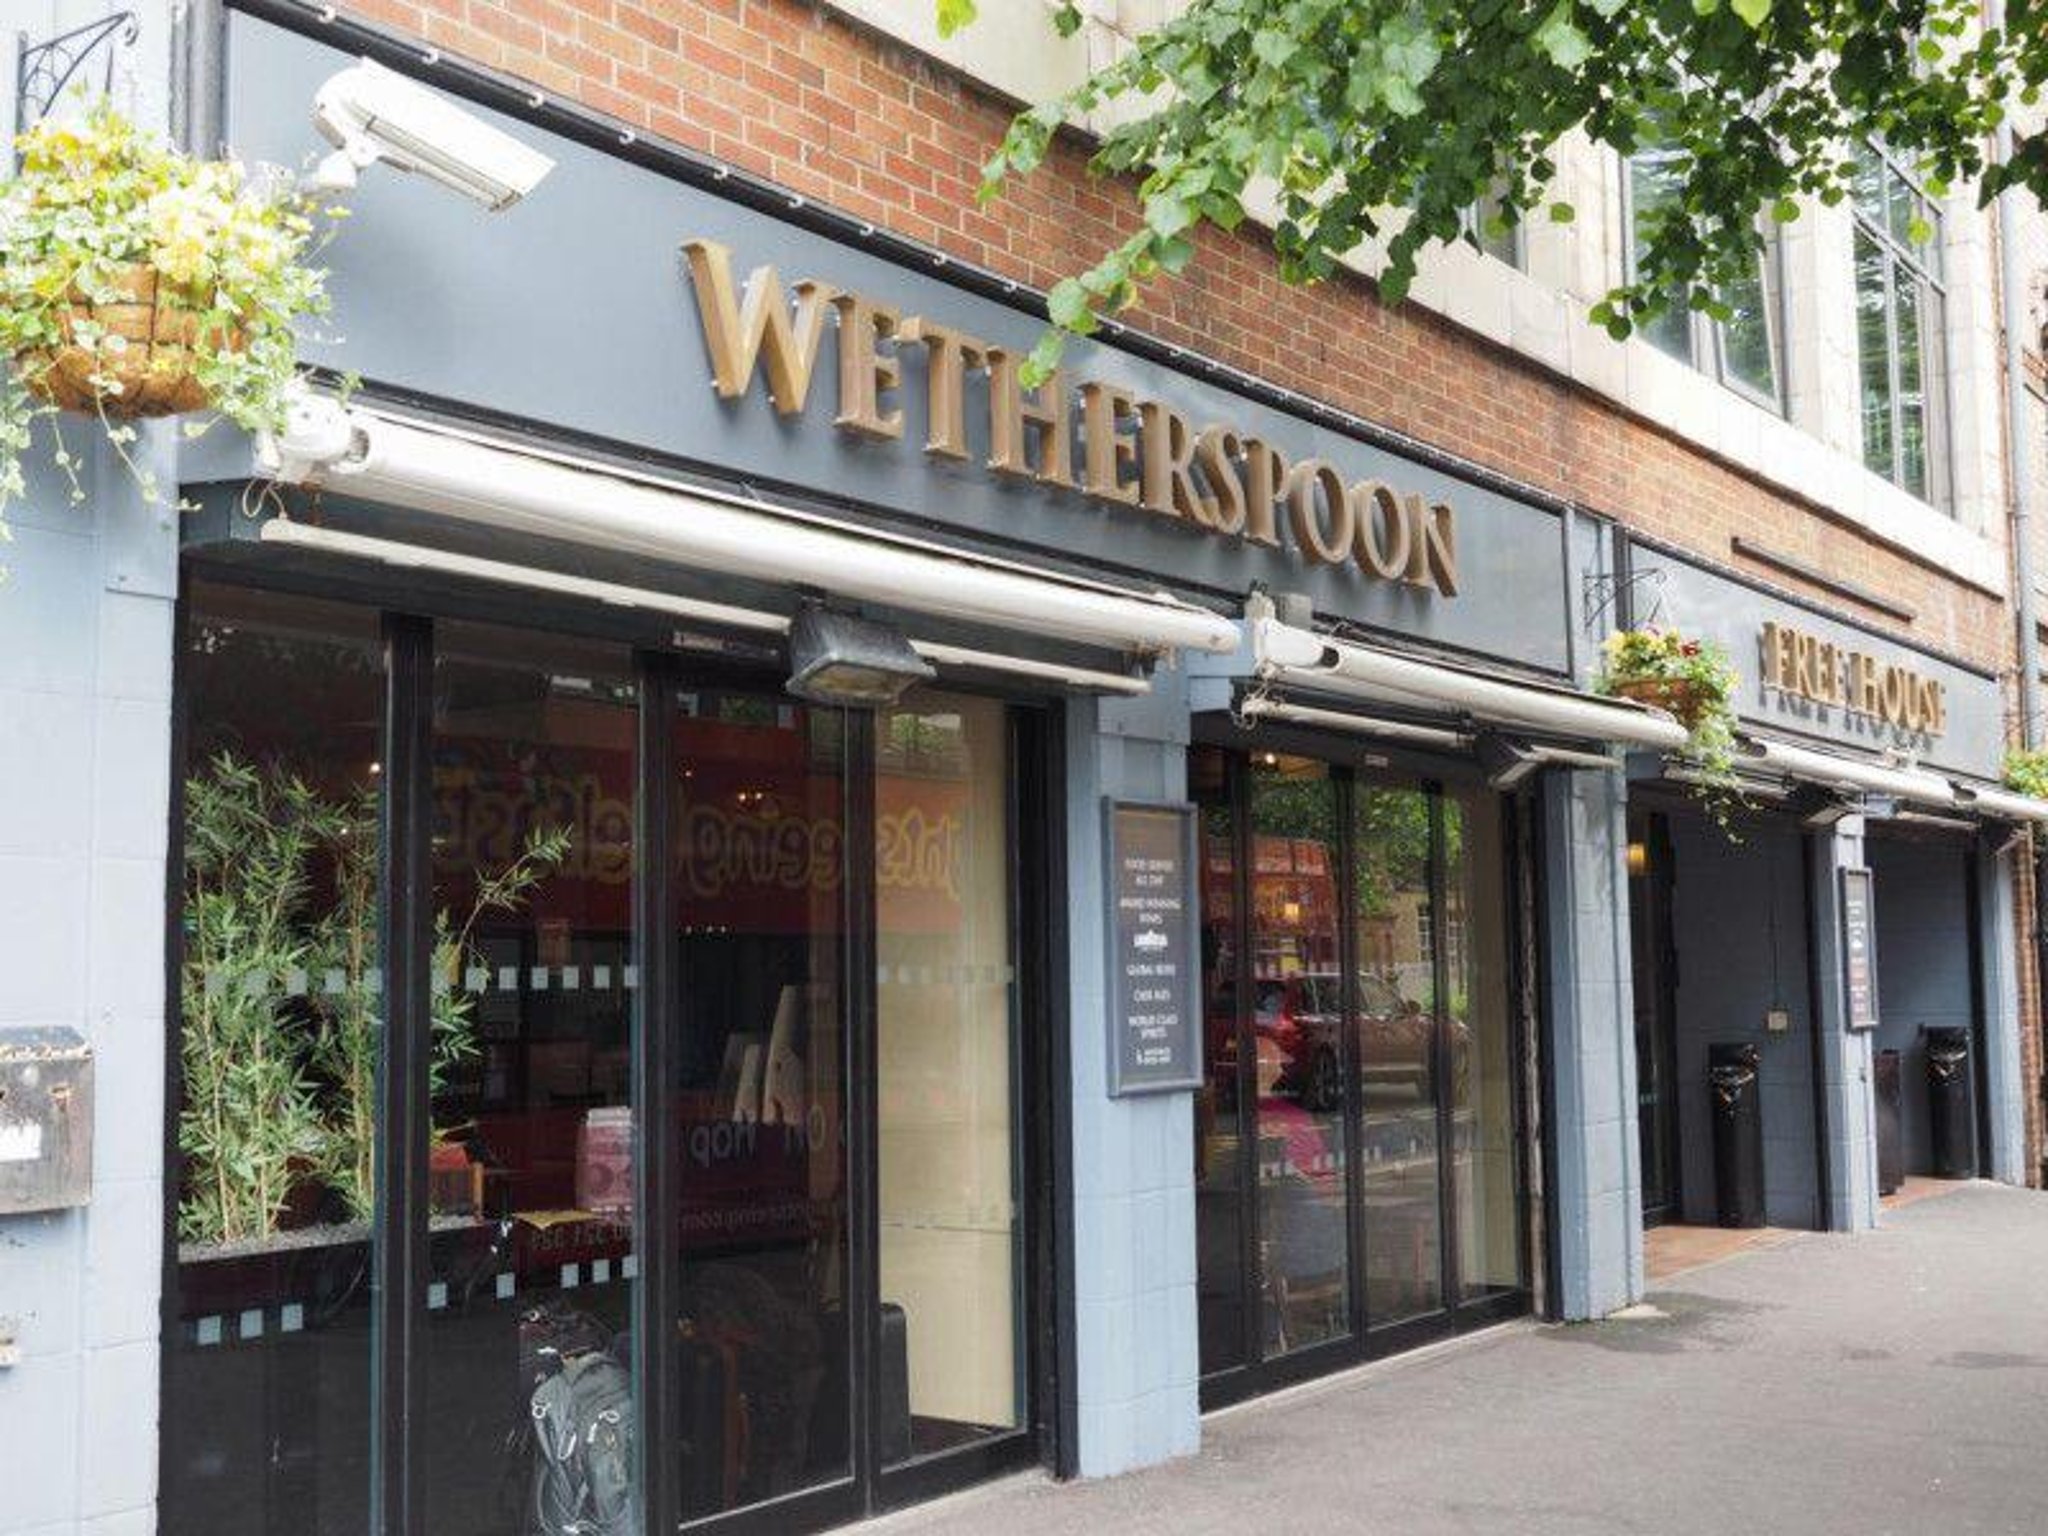 Wetherspoons Plans To Reopen Almost 400 Pubs On April 12 Including Several In Portsmouth Havant Fareham And Gosport The News